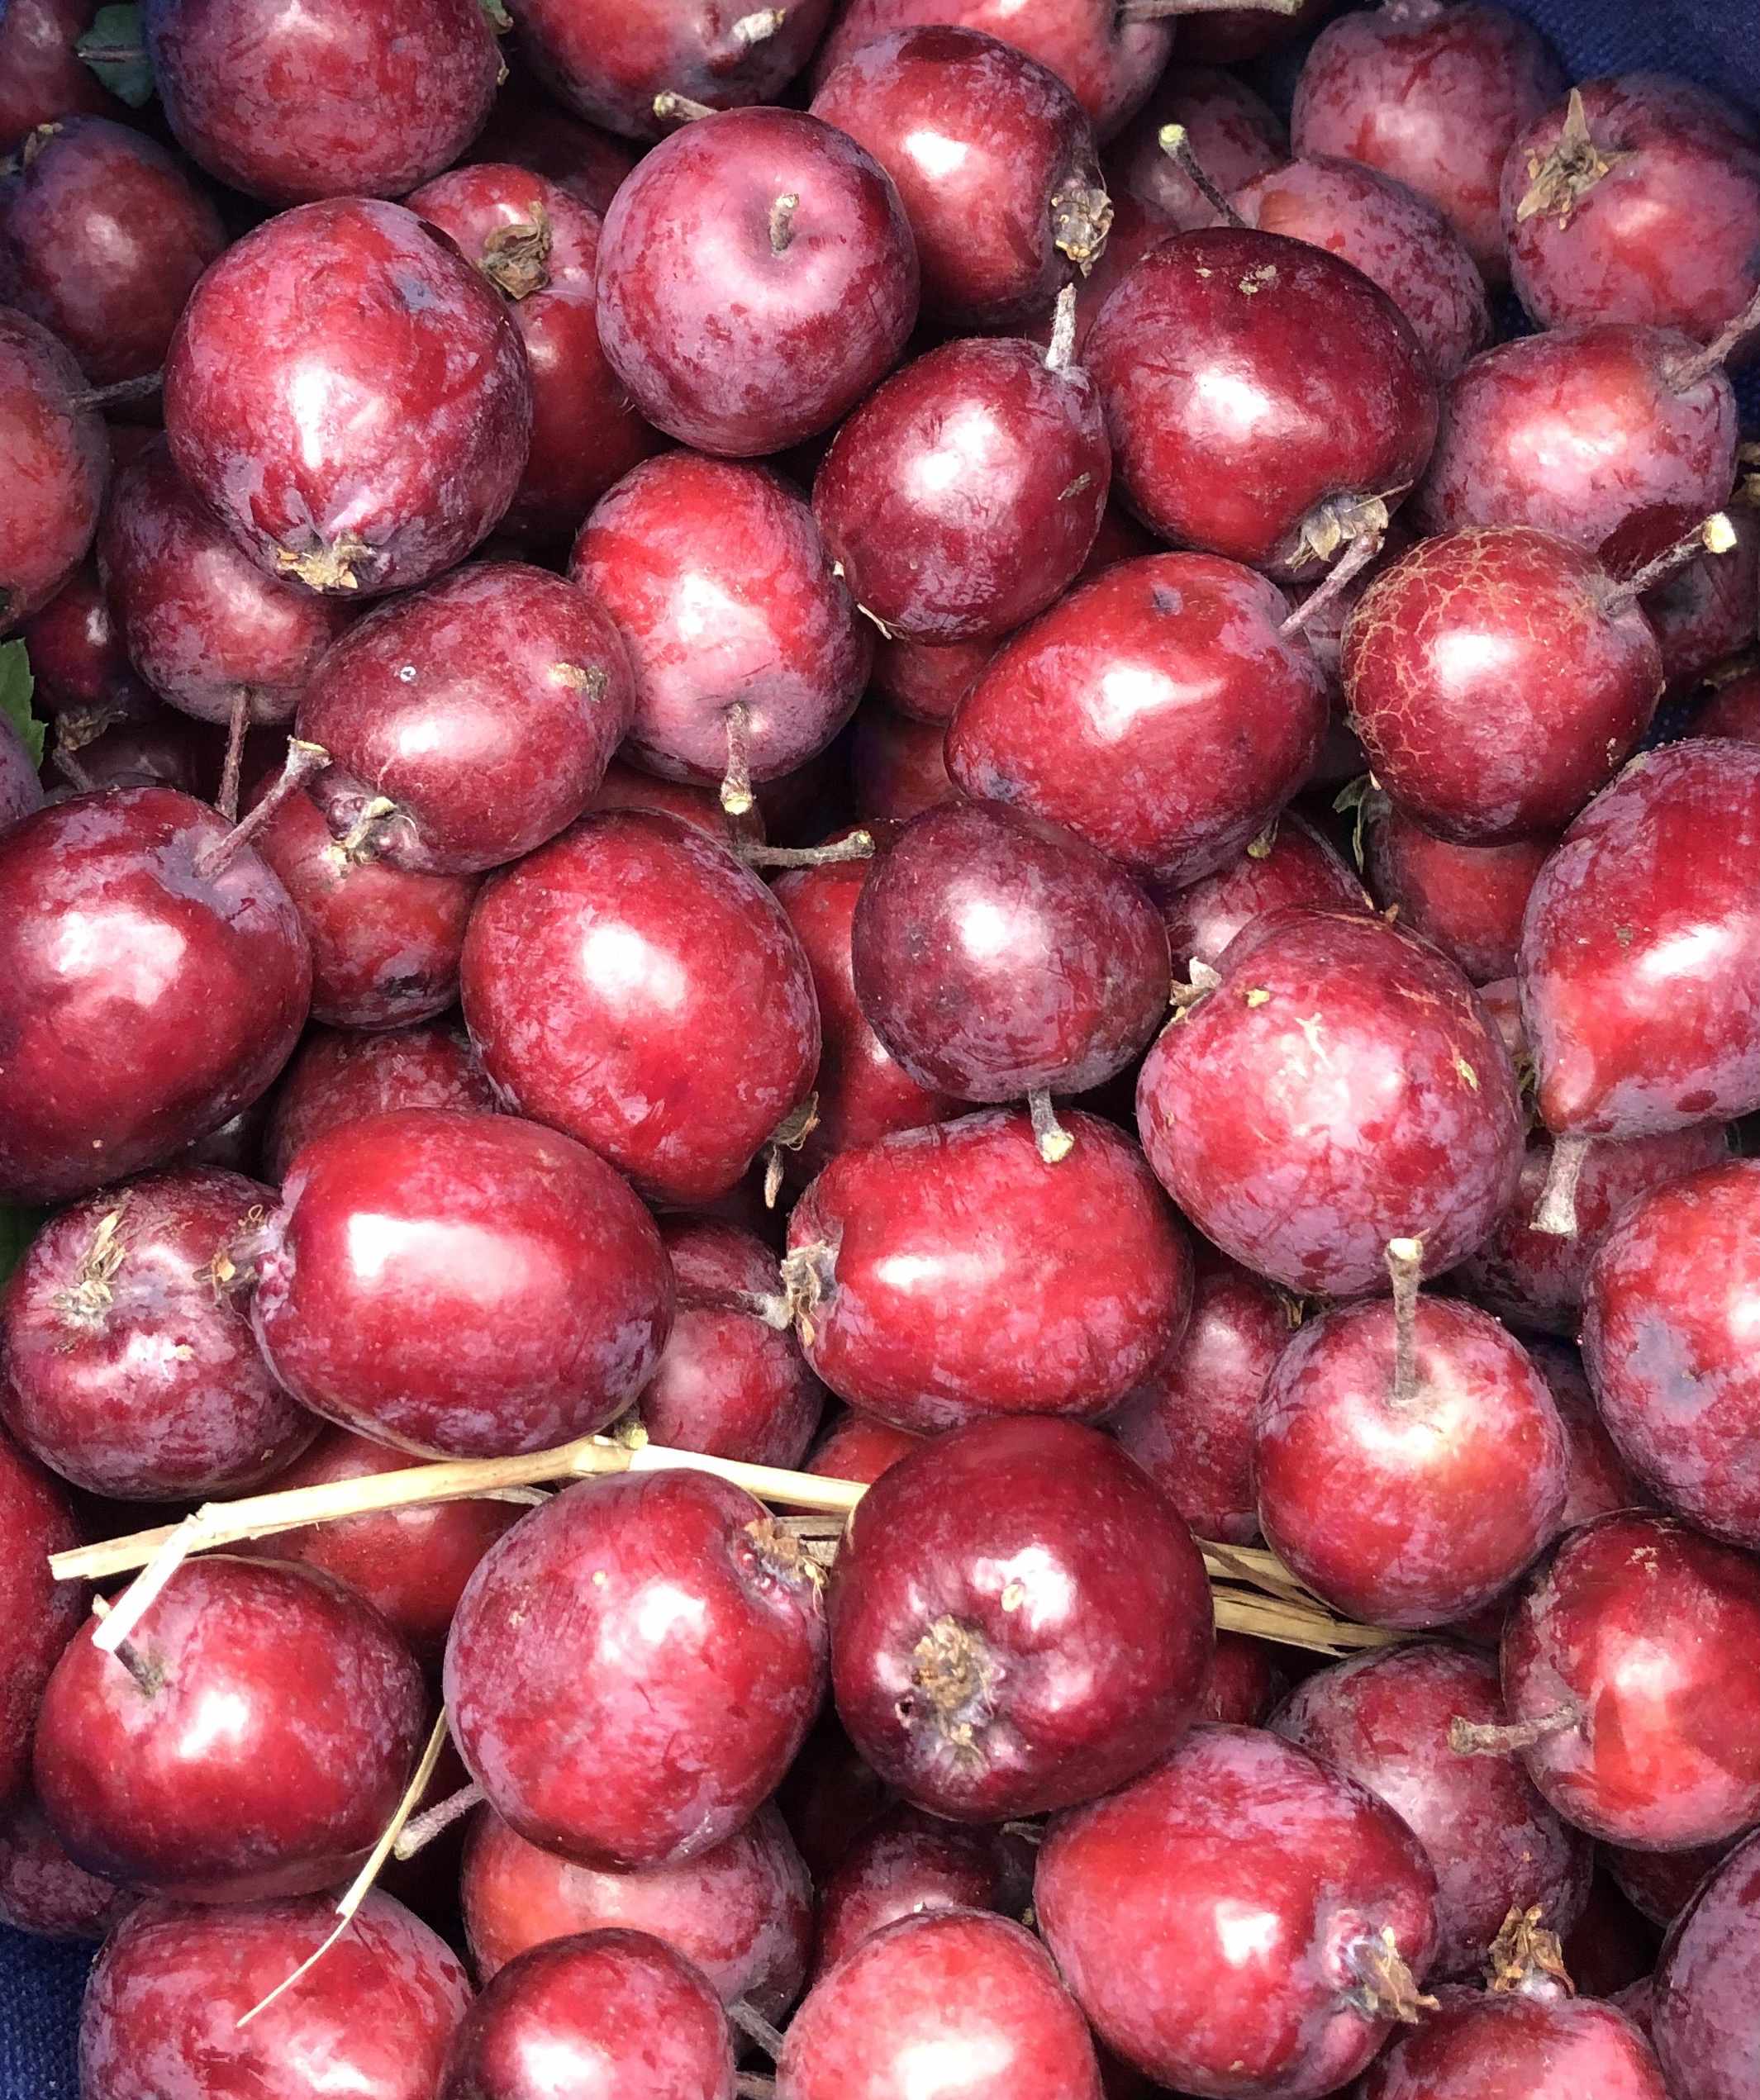 A close up image of crab apples picked at elisabeth rogers community garden. They are sour and excellent for making jelly